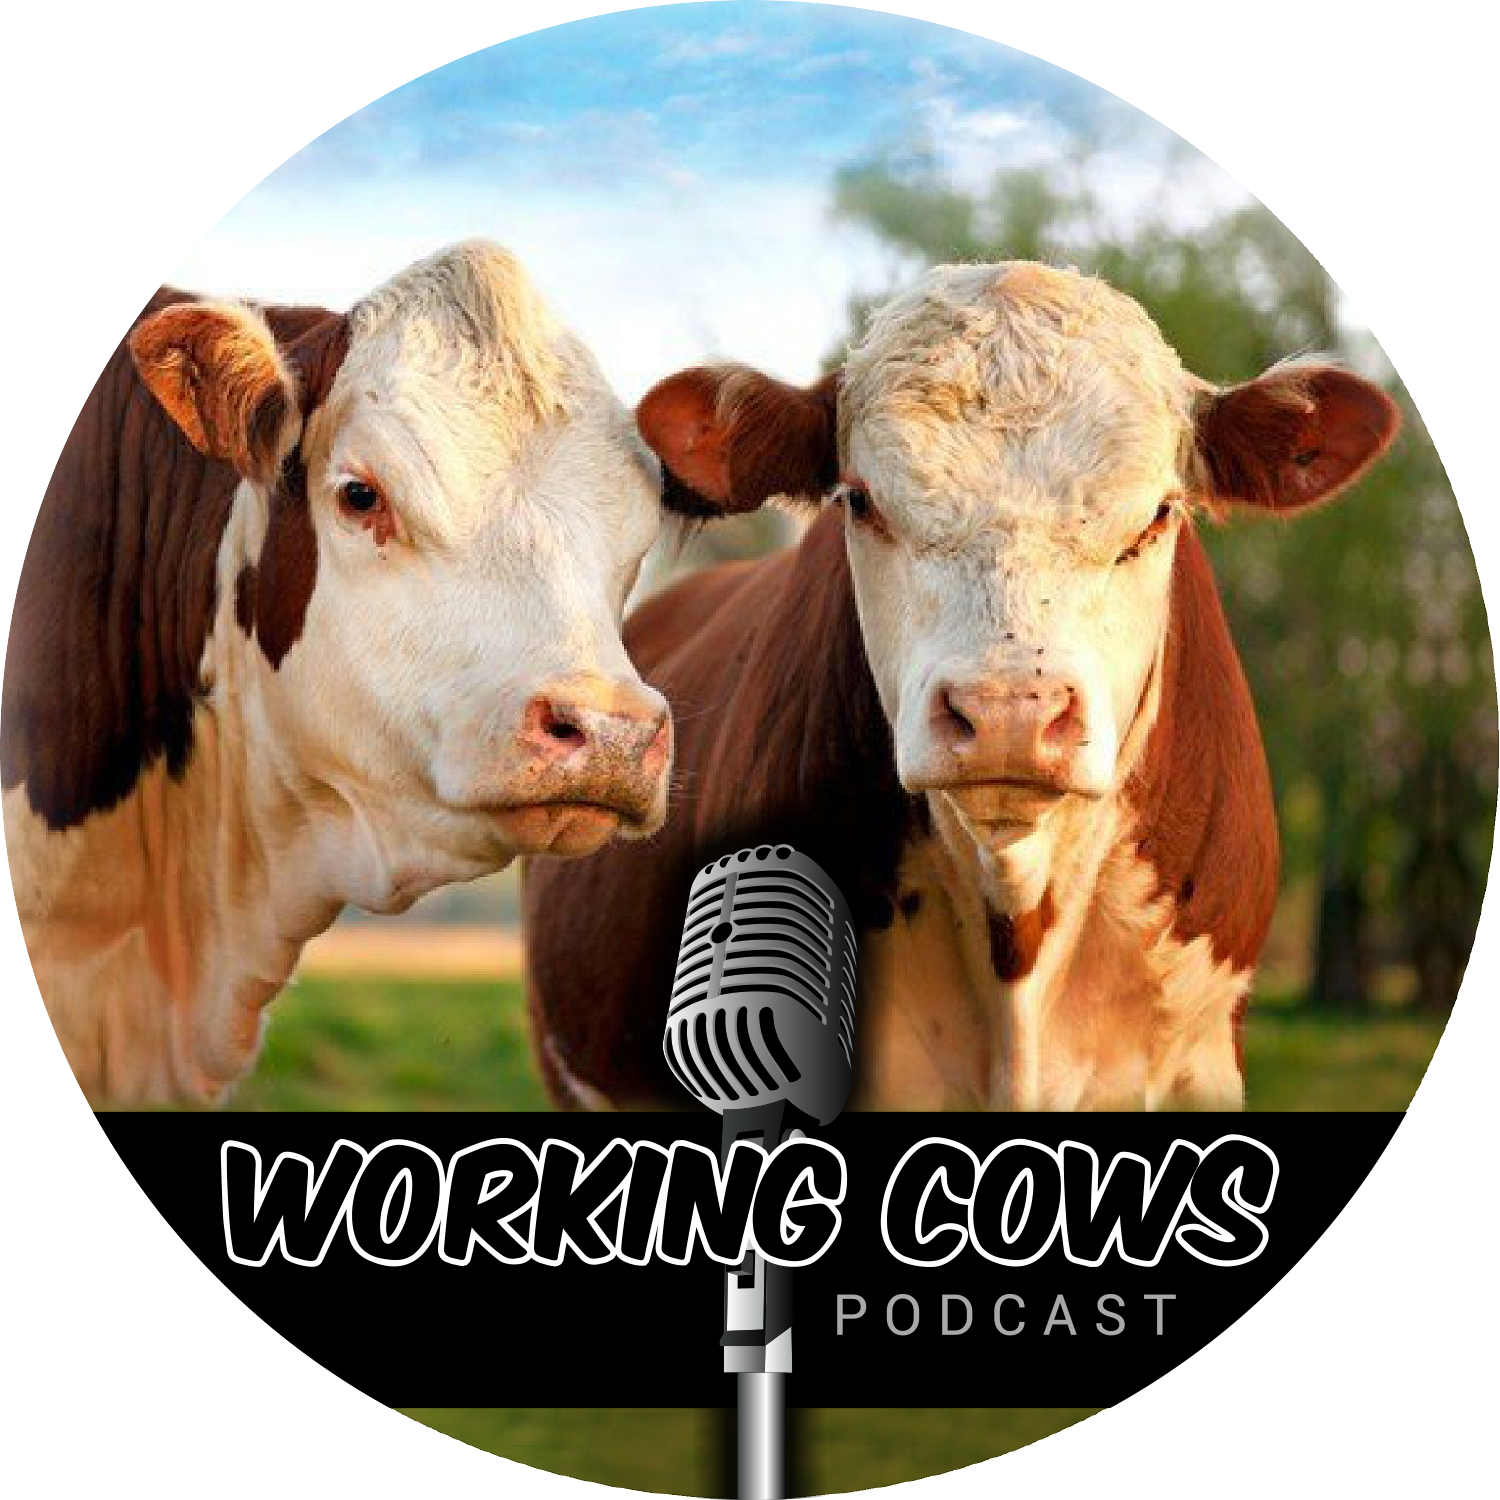 Sea-90 Featured on Working Cows Podcast Episode 261